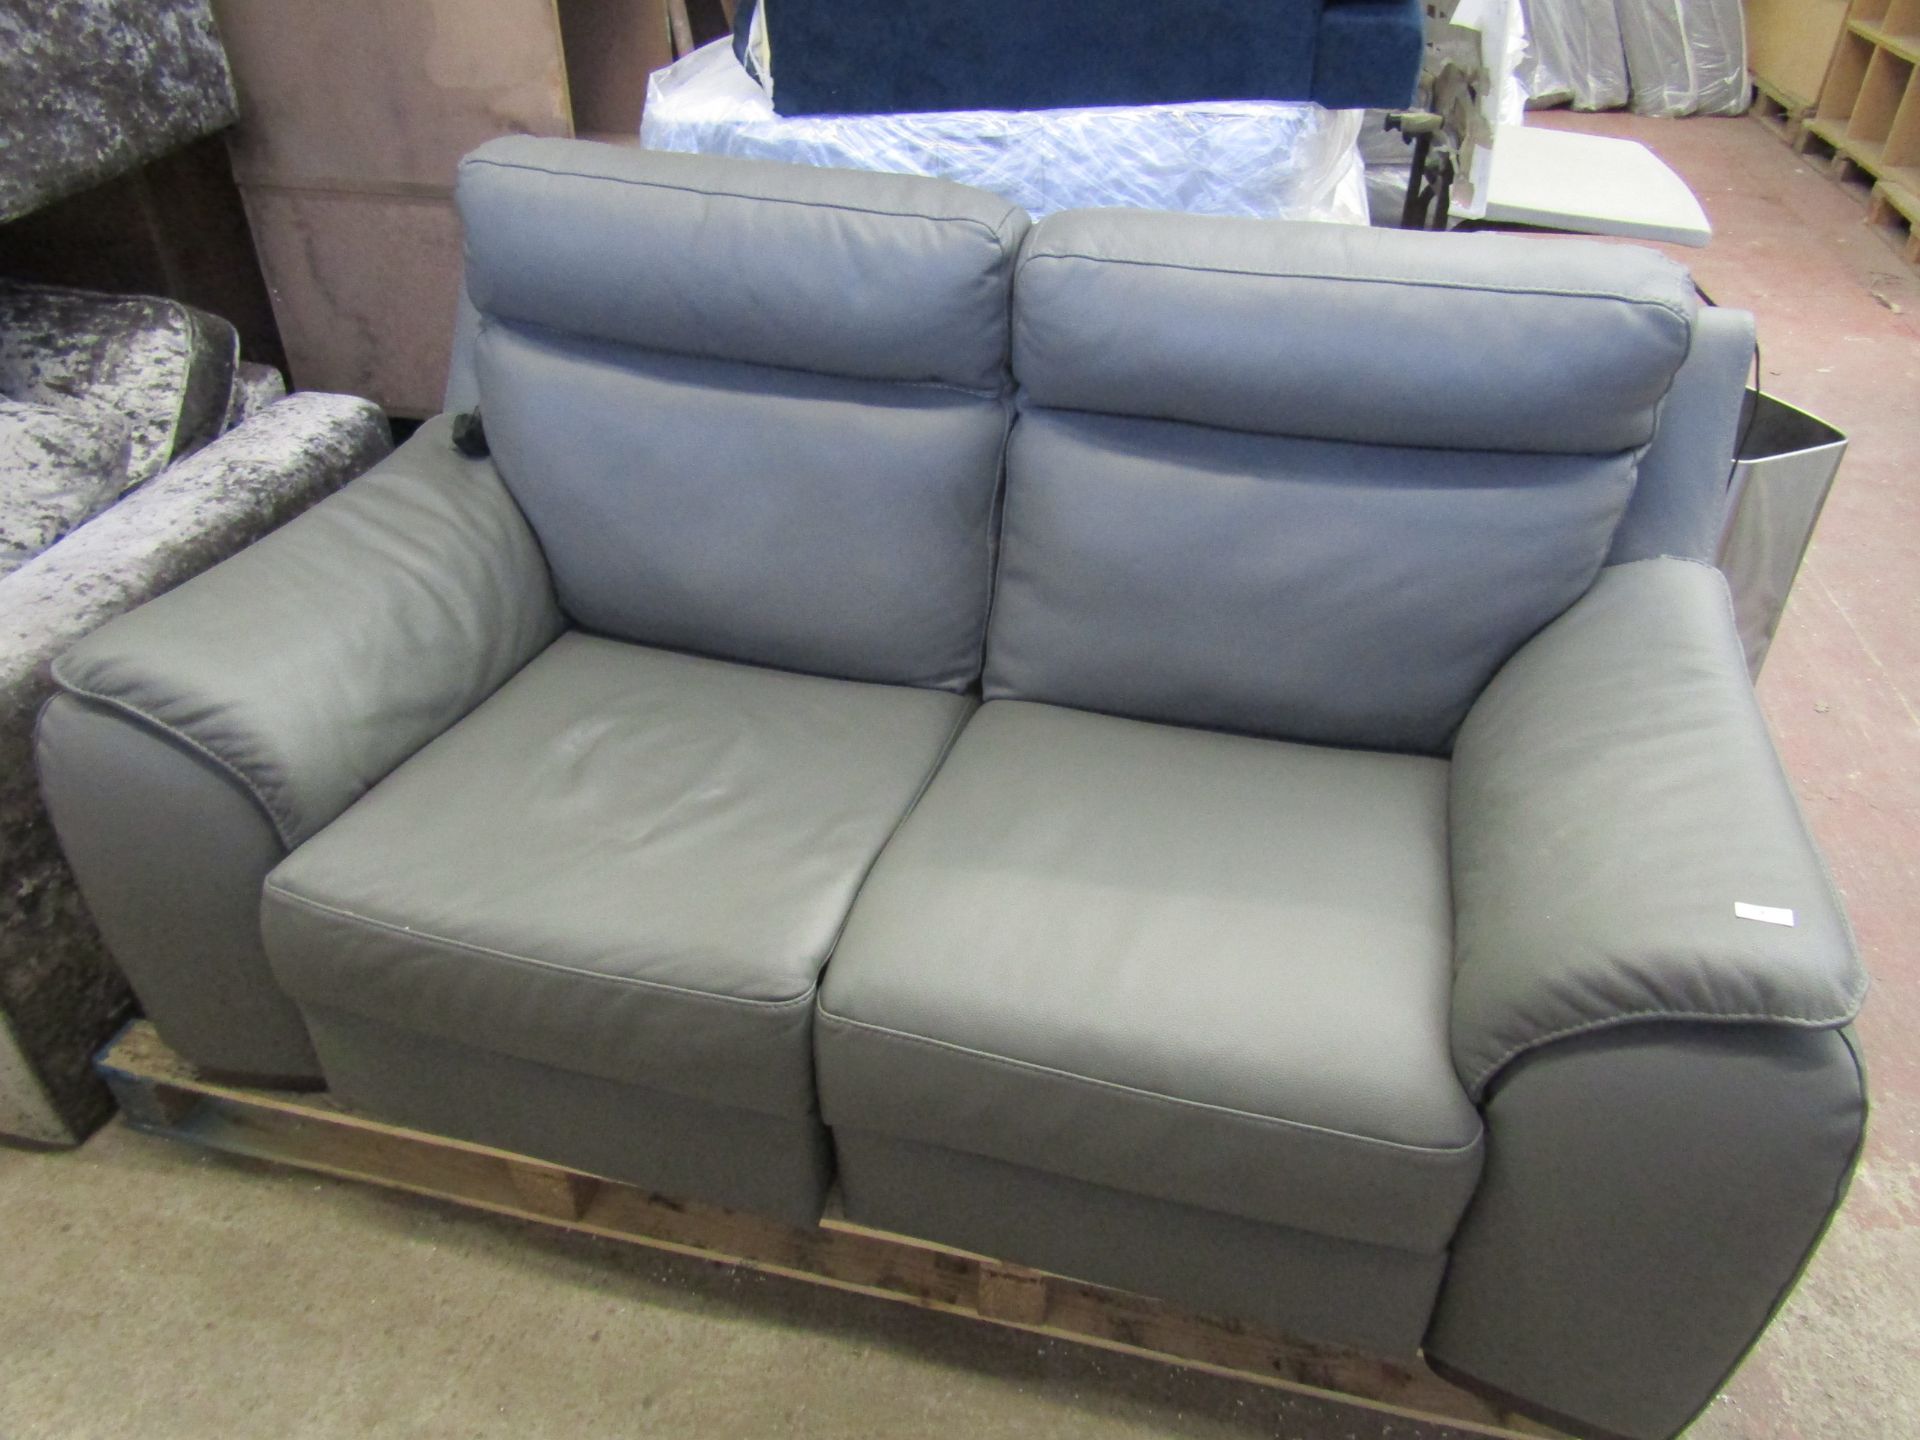 Calia 2 seater electric grey leather electric reclining sofa, tested working